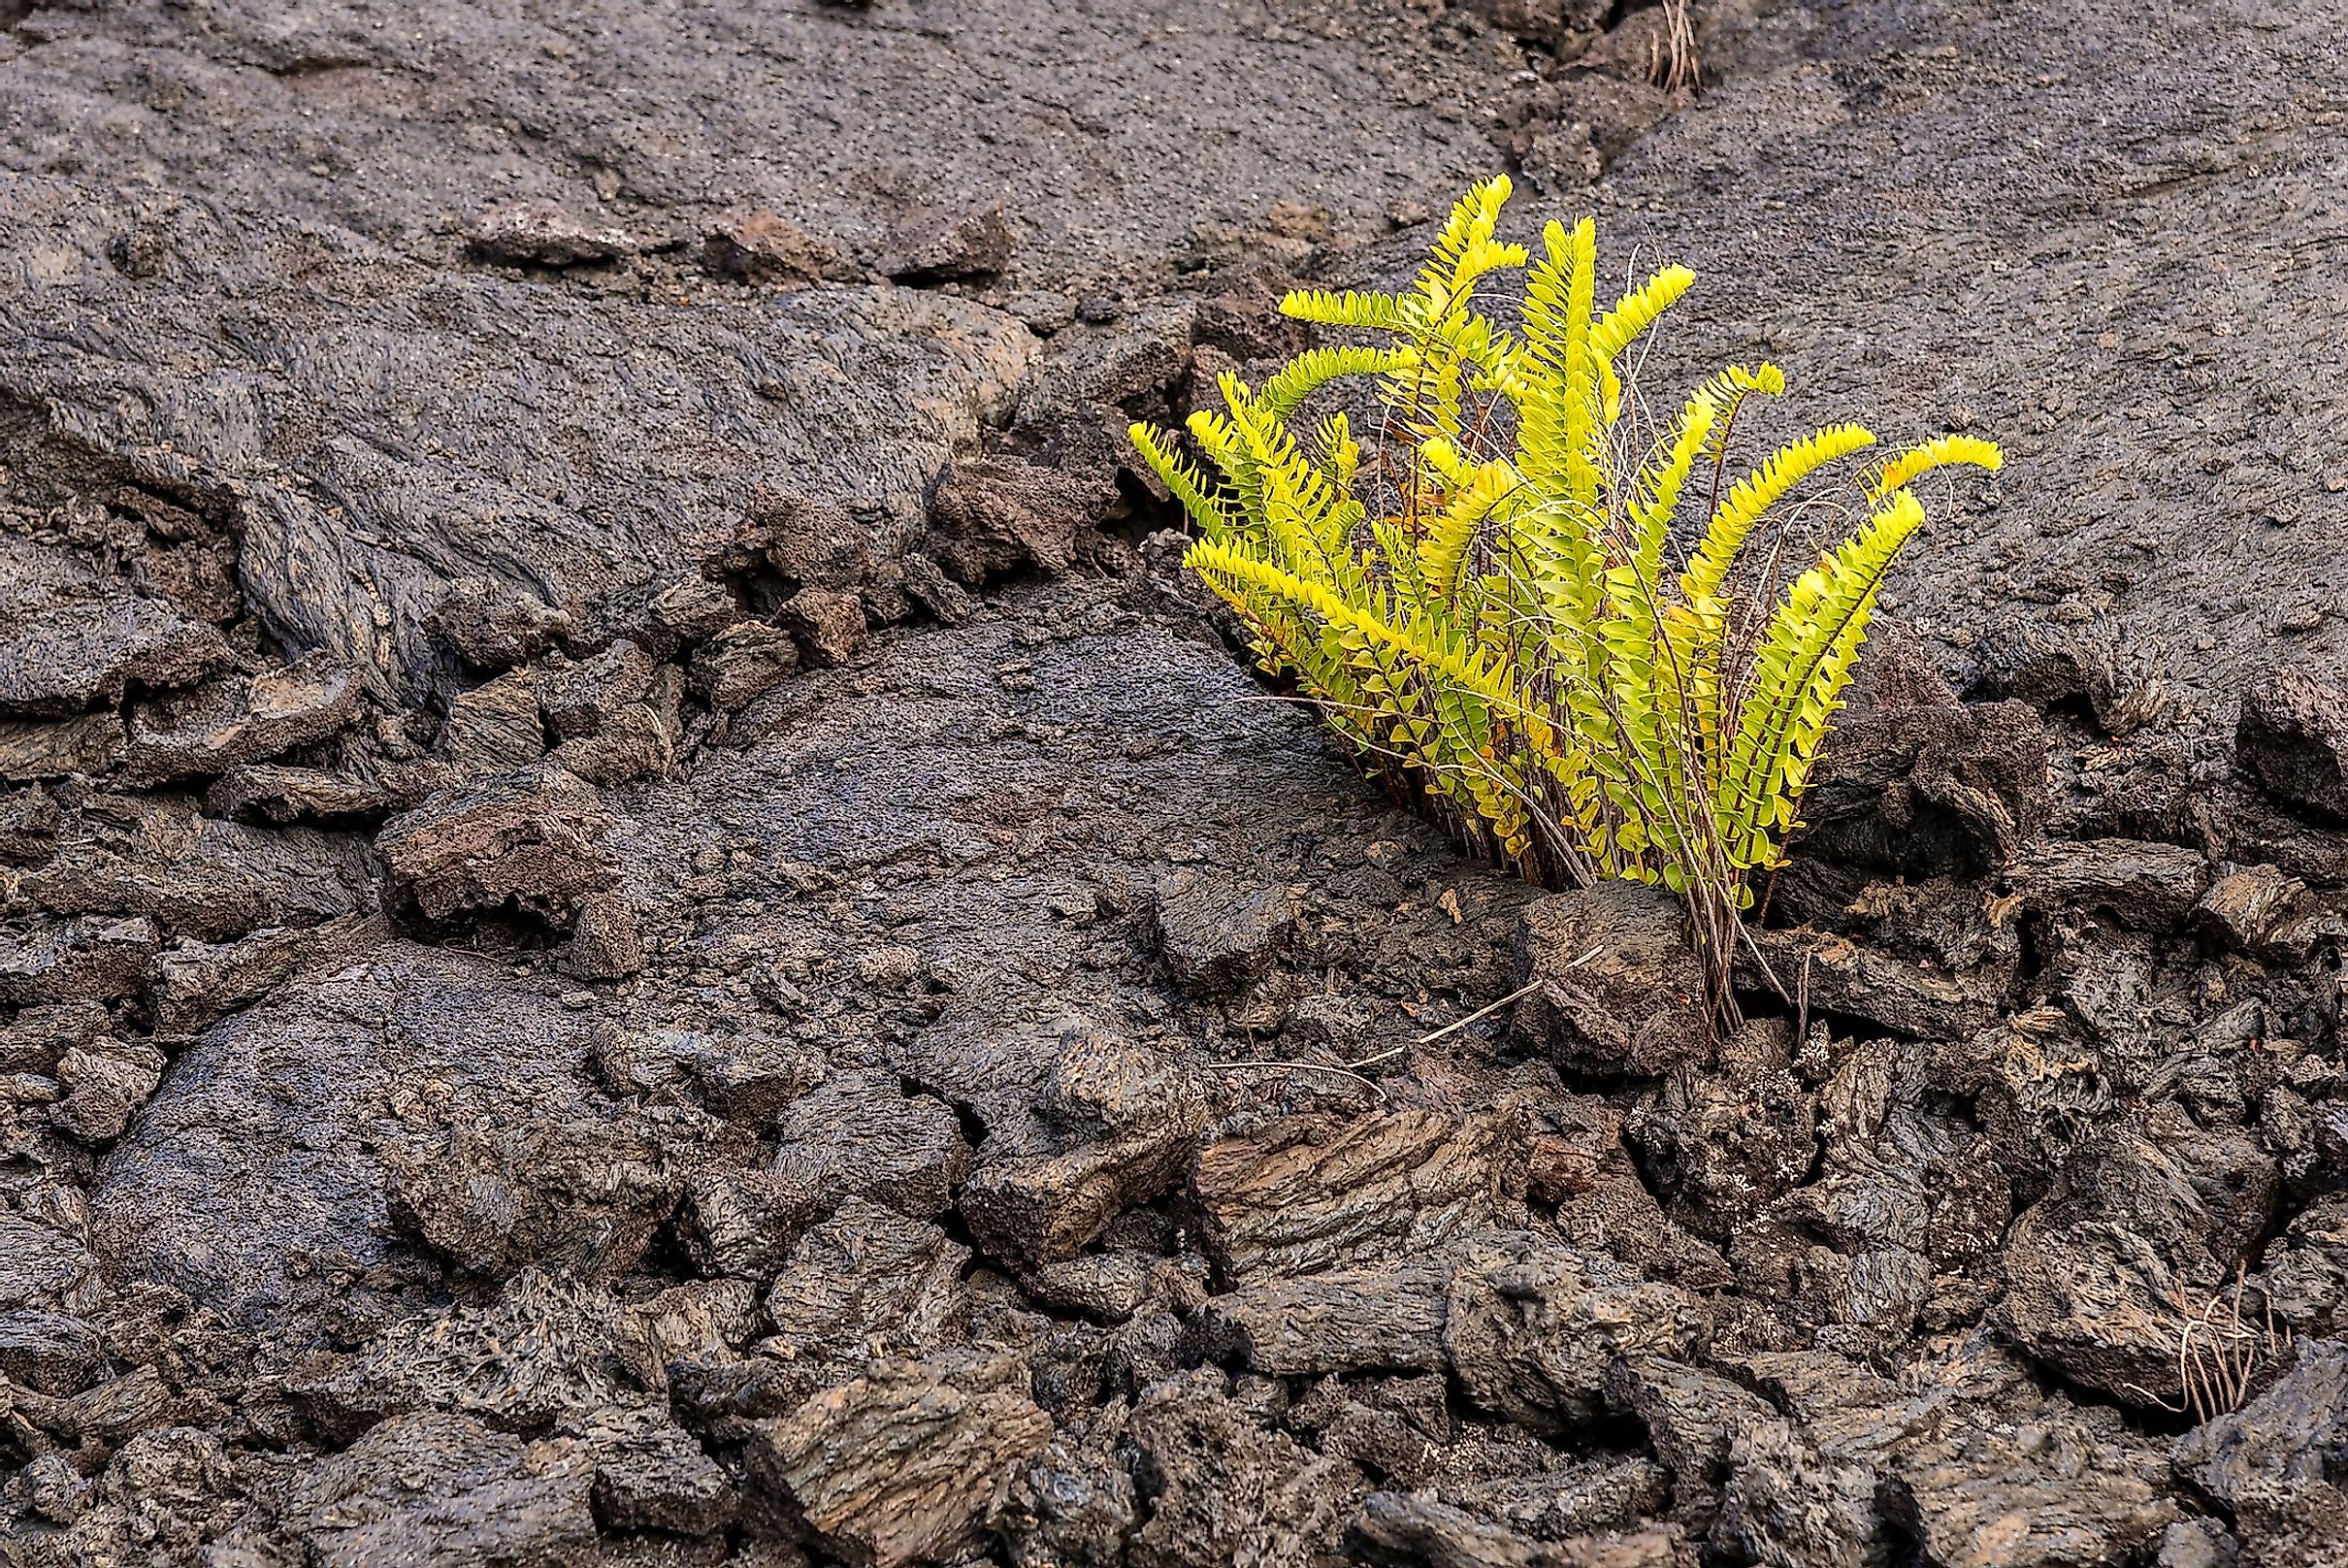 A tiny fern growing on barren rock, the first signs of ecological succession. 